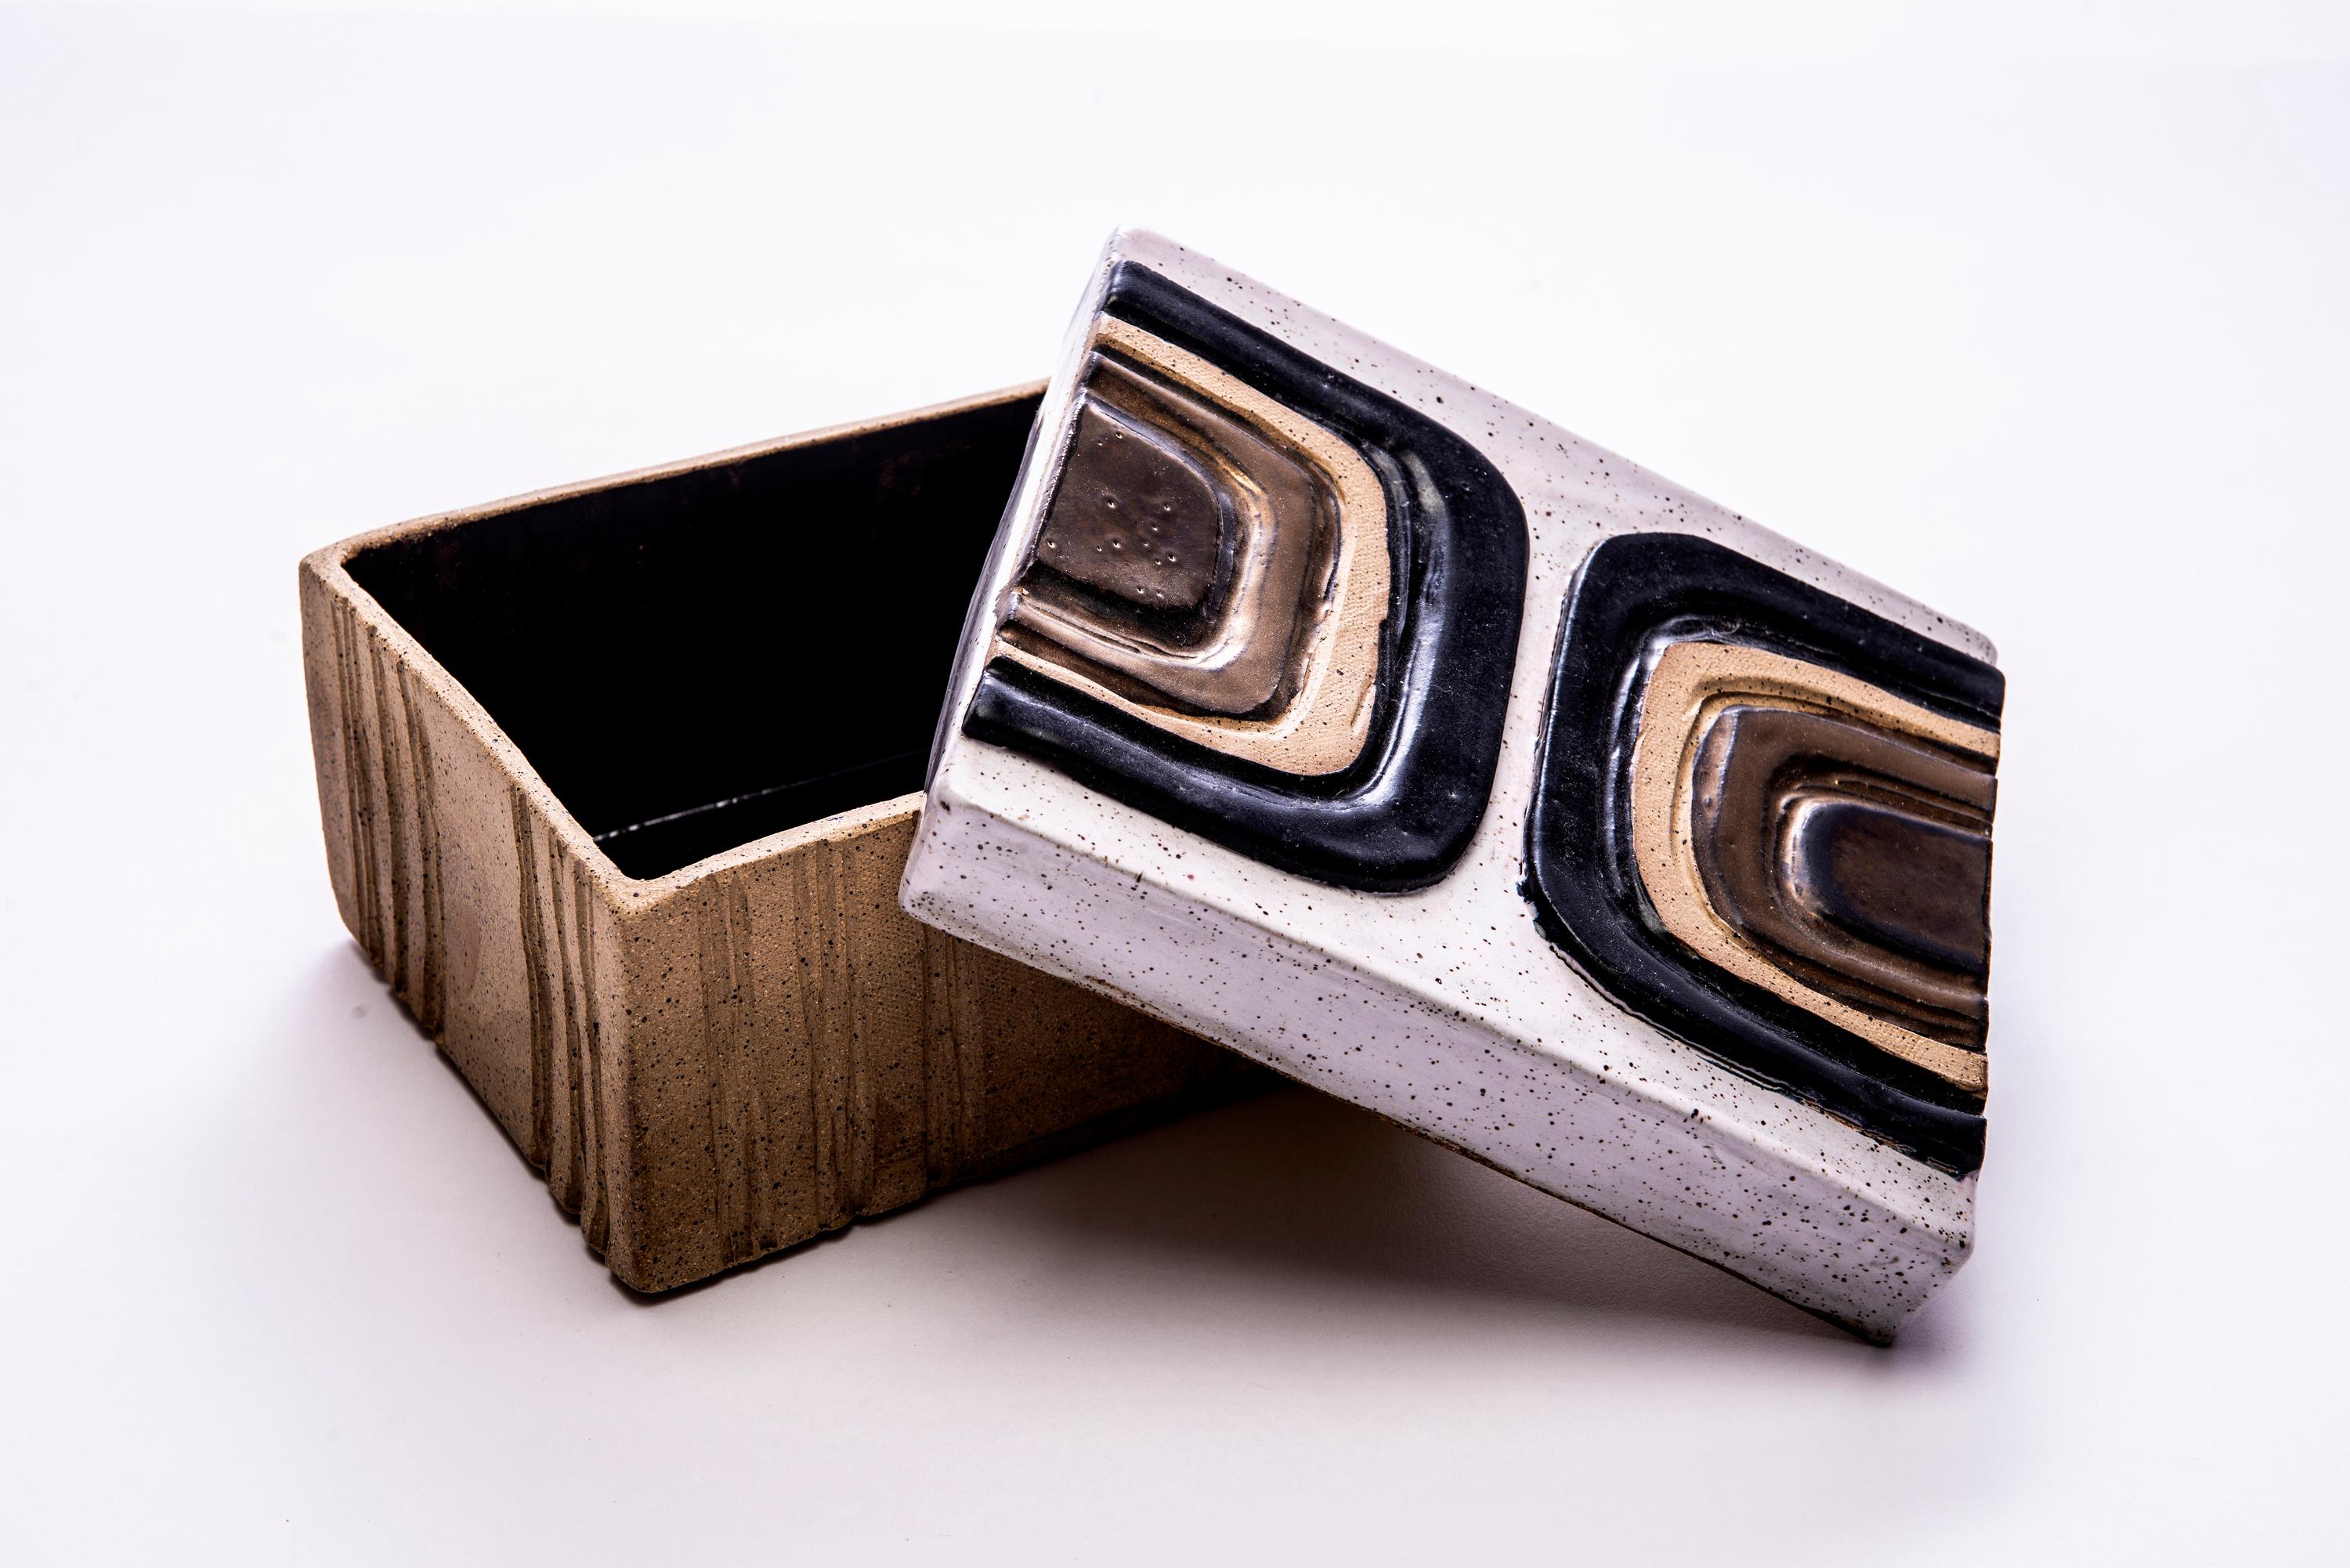 Trish DeMasi
Moderno Box, Gio, 2020
Glazed Ceramic
4 x 8 x 6.75 in

The Moderno collection by Trish DeMasi features geometric shapes, sumptuous textures and pleasing neutral colors in the form of glazed ceramic vessels and boxes.